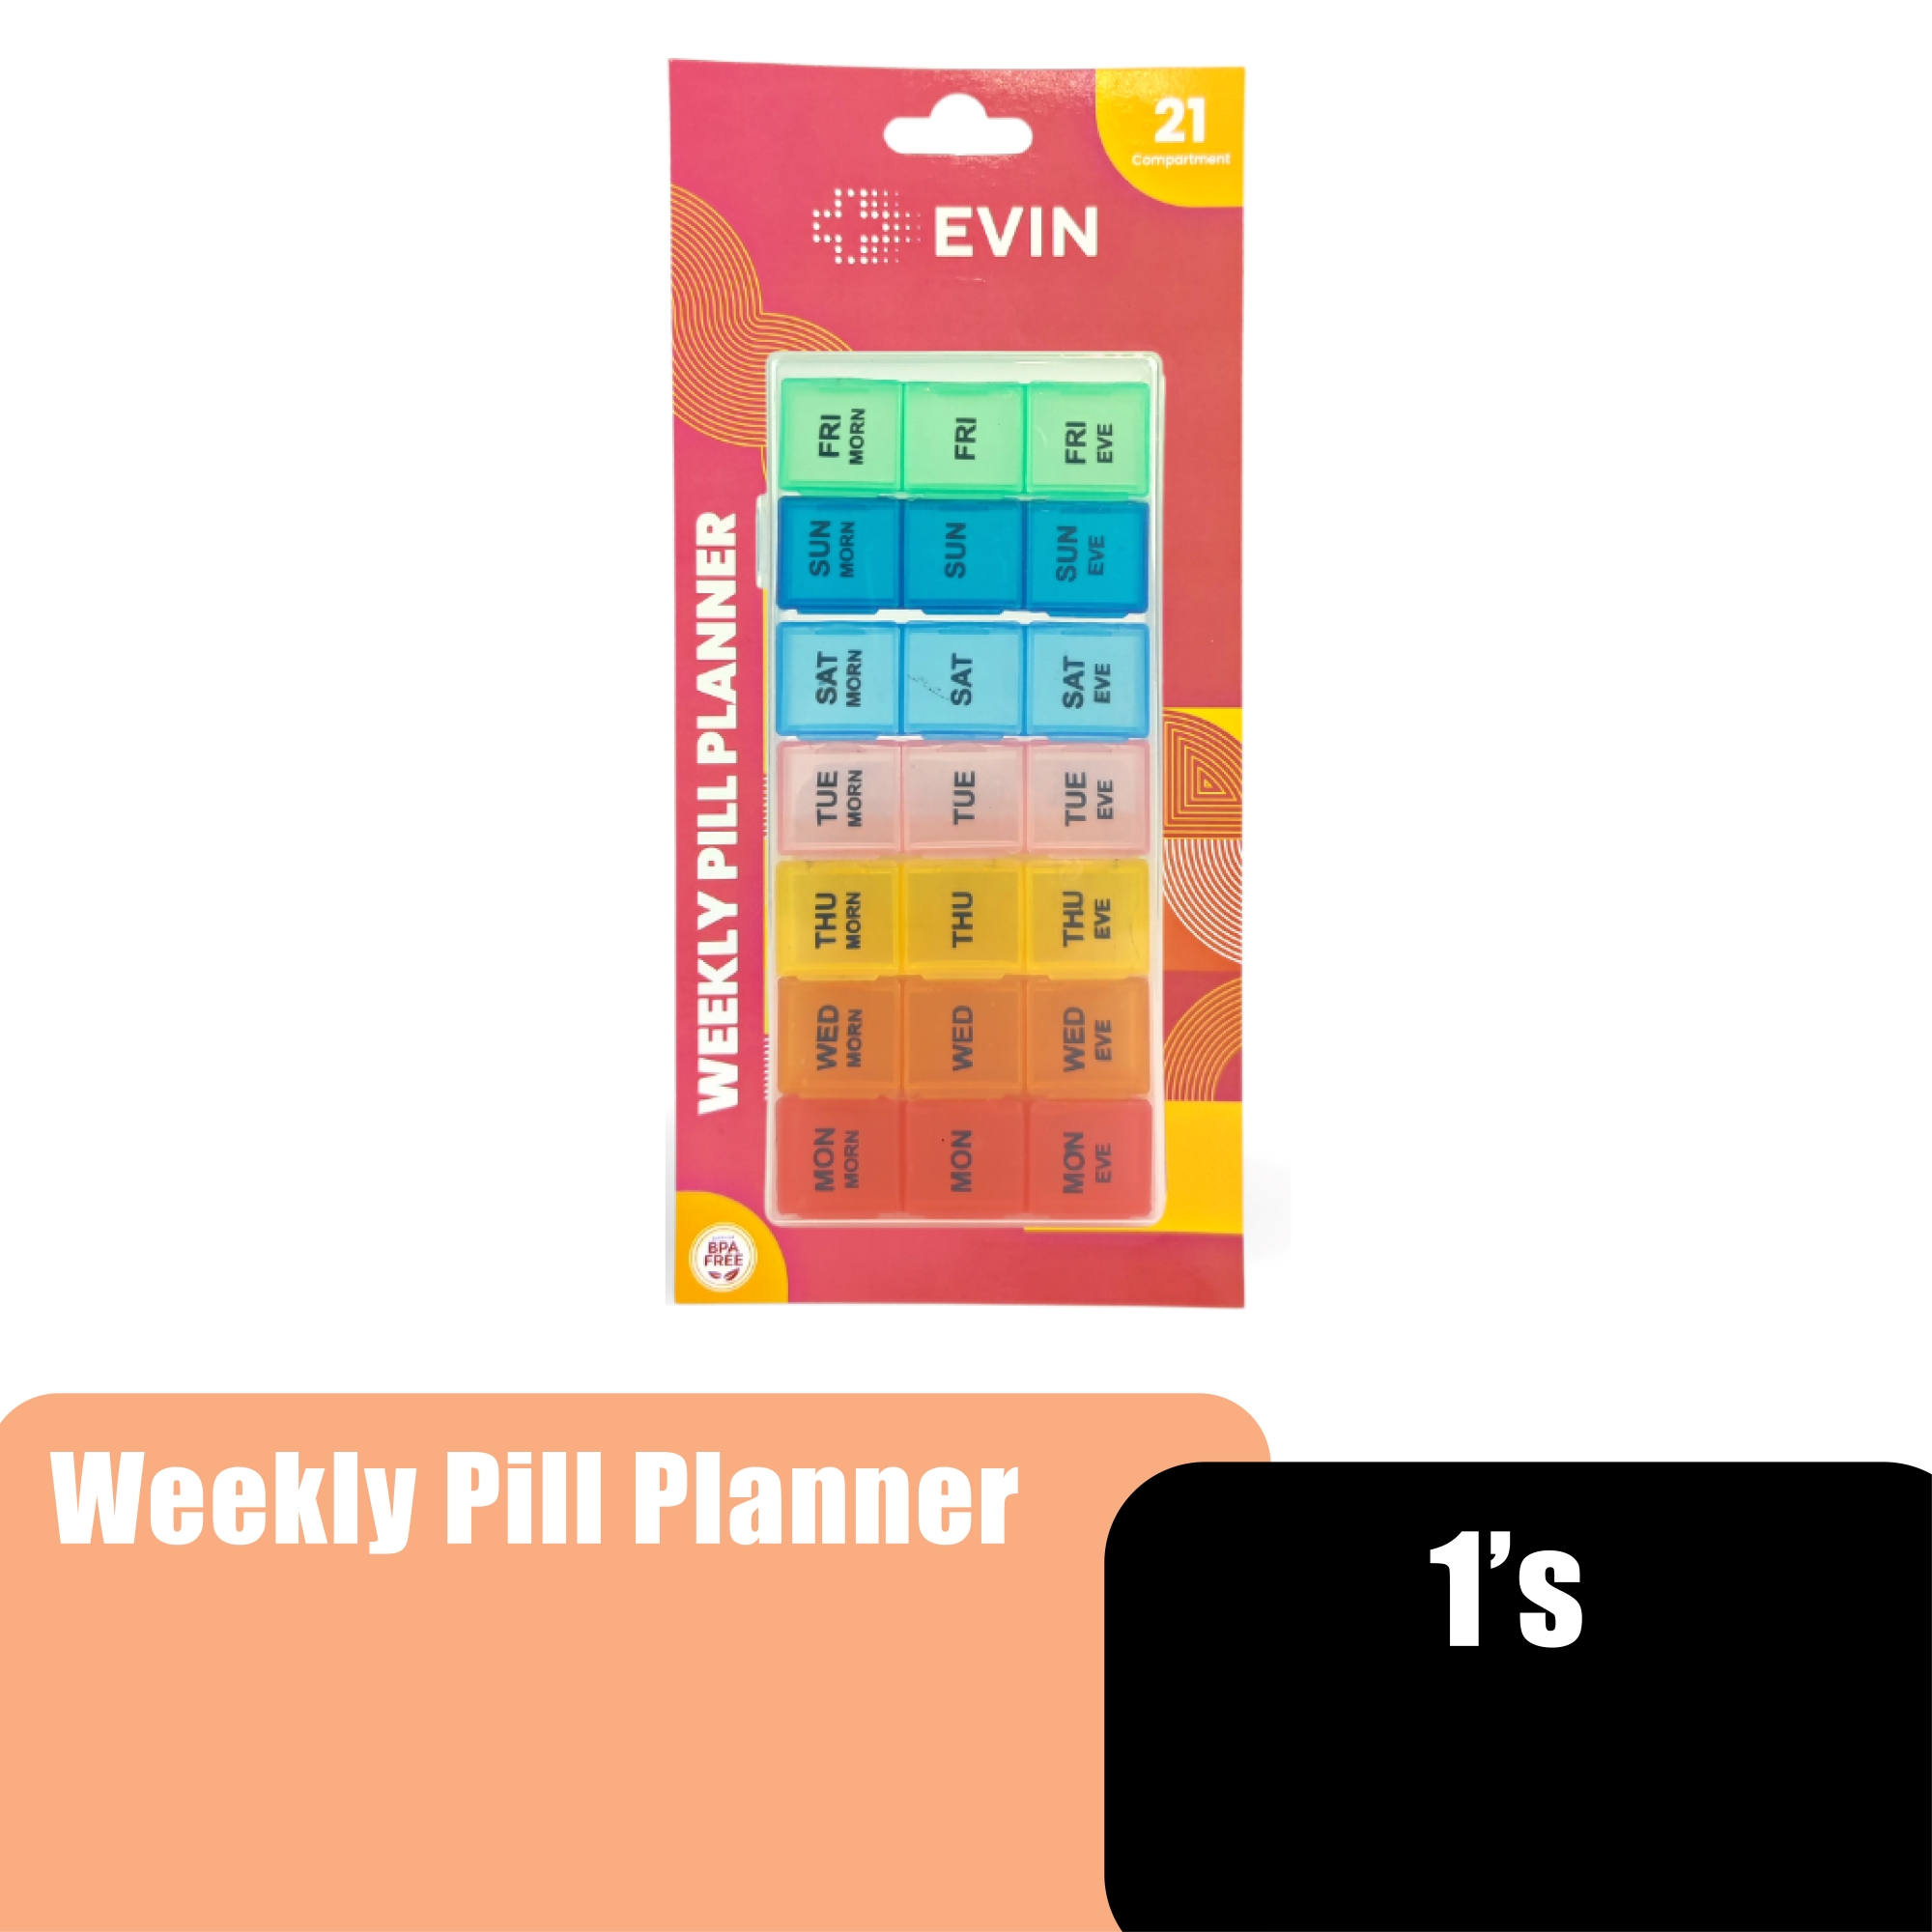 EVIN WEEKLY PILL PLANNER